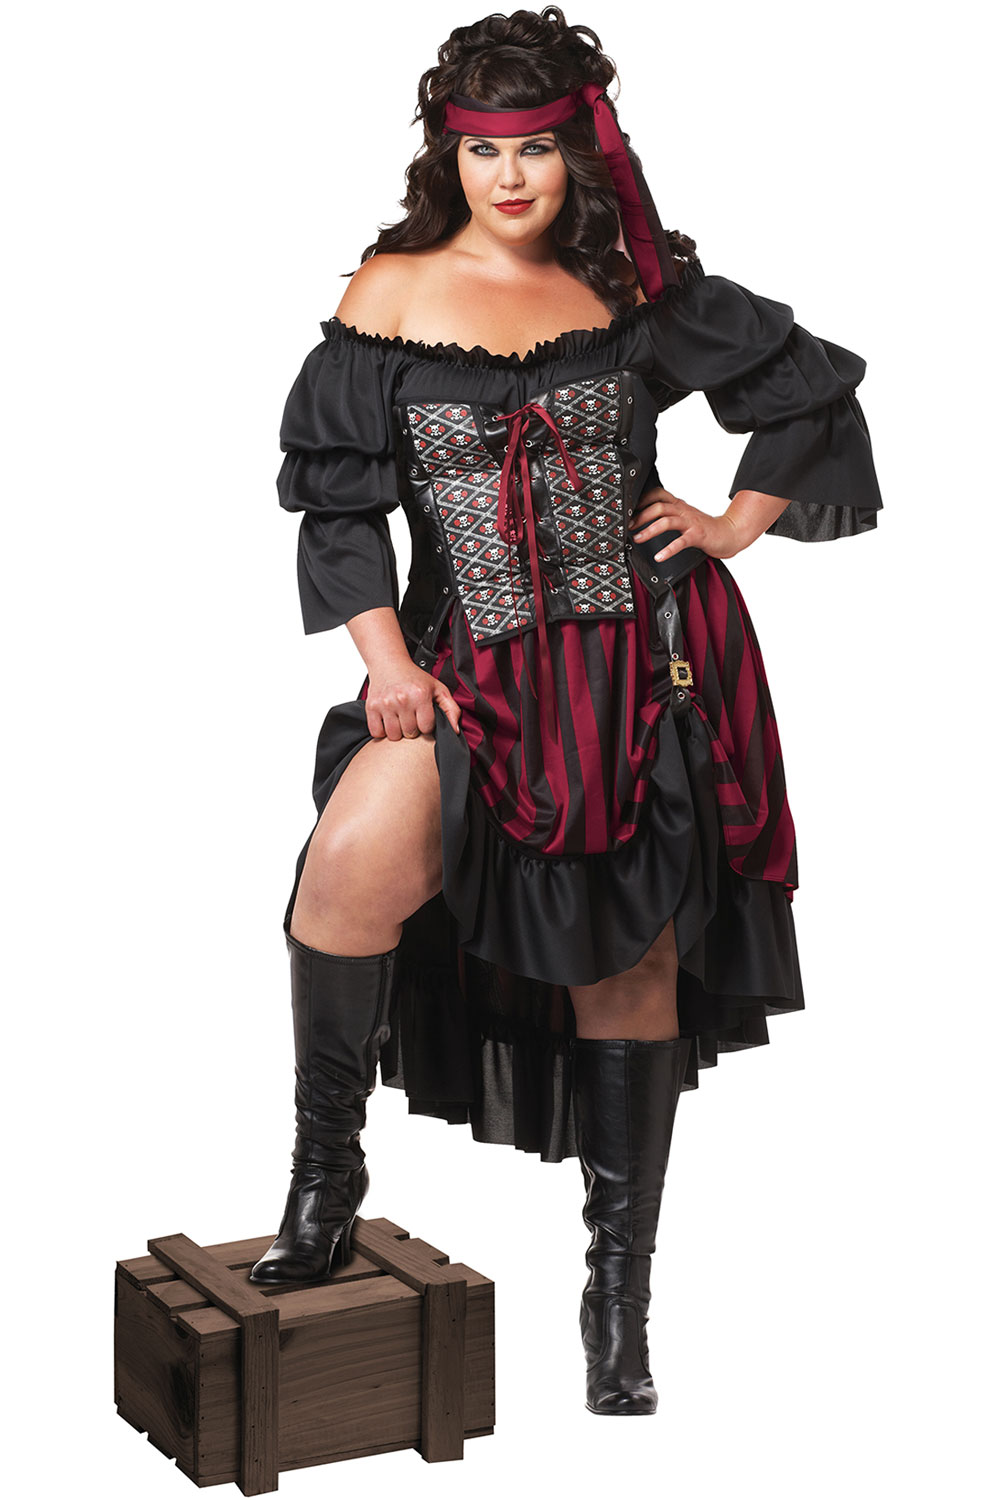 Pirate Wench Adult Plus Size Halloween Costume 3x for sale online